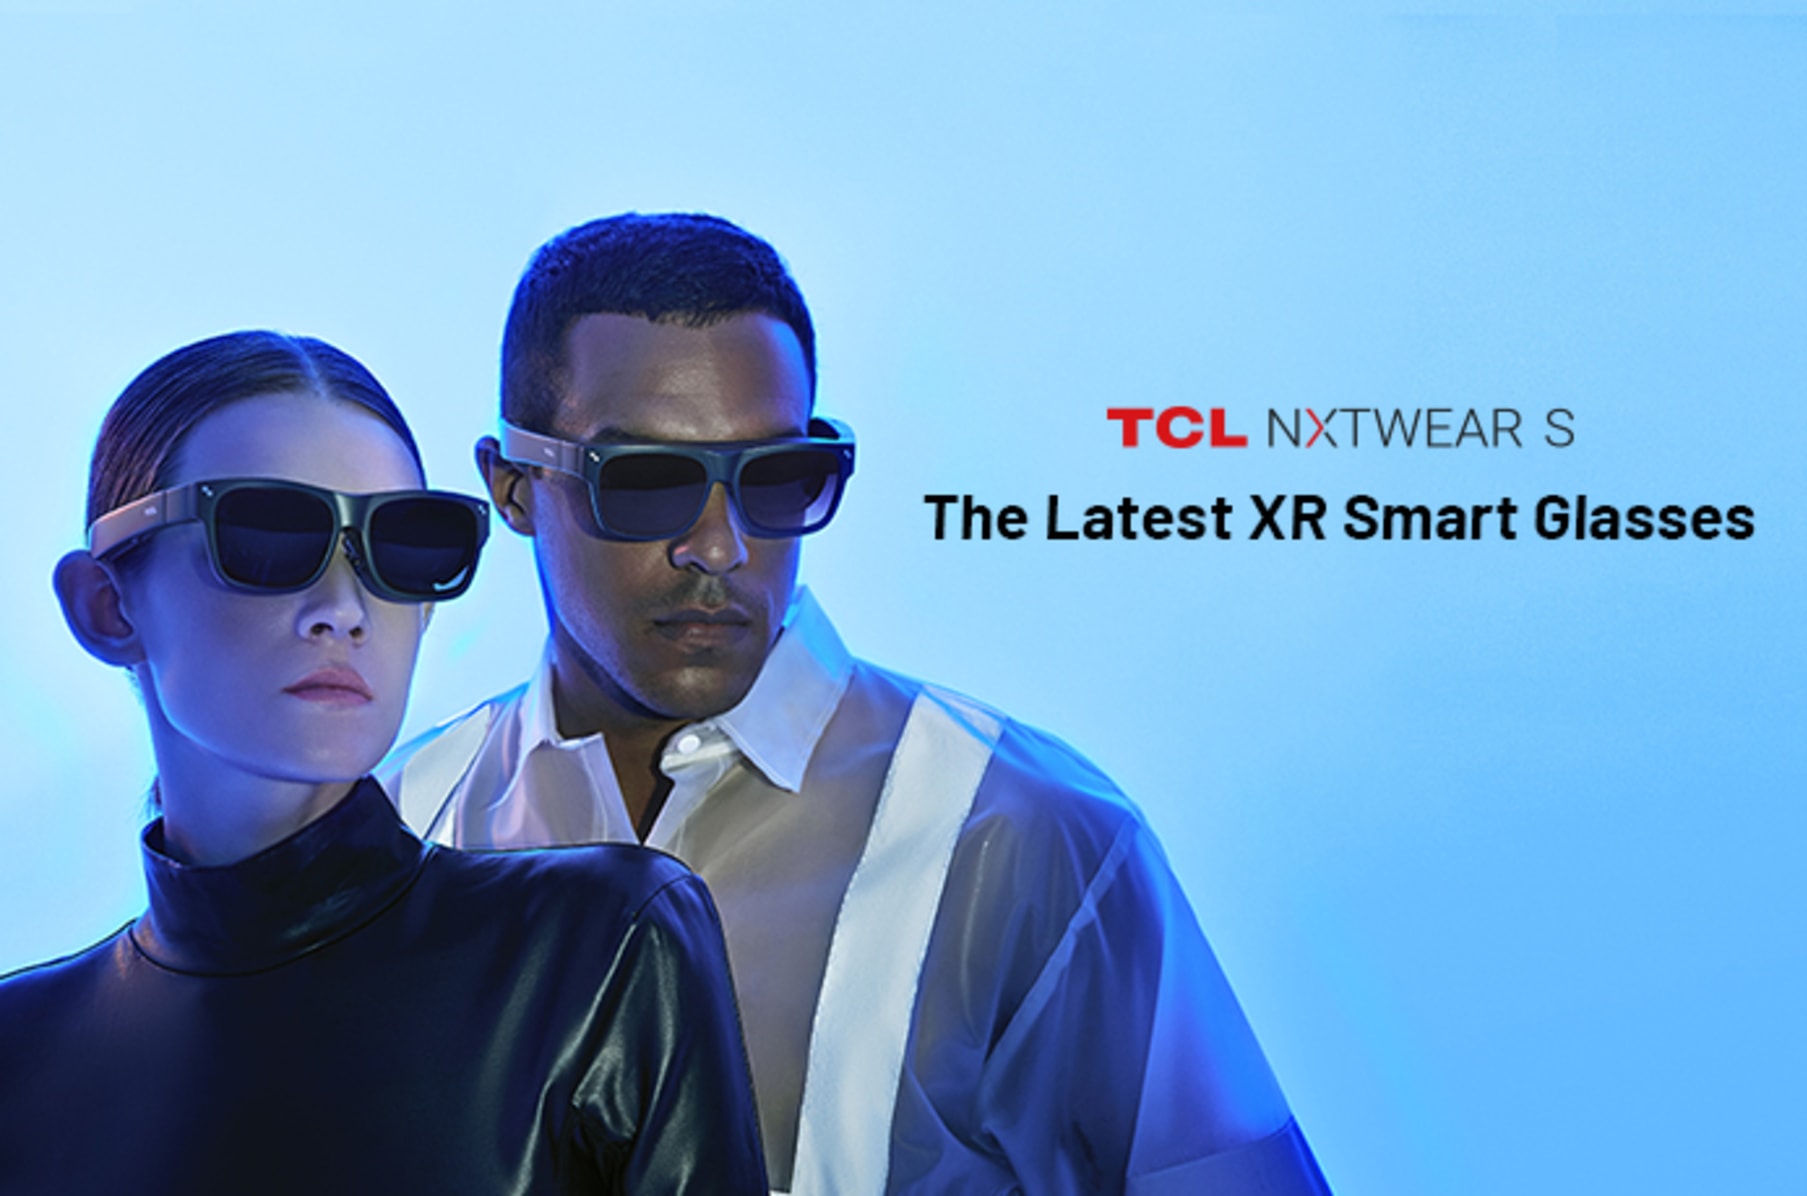 TCL NXTWEAR S XR Glasses | Indiegogo